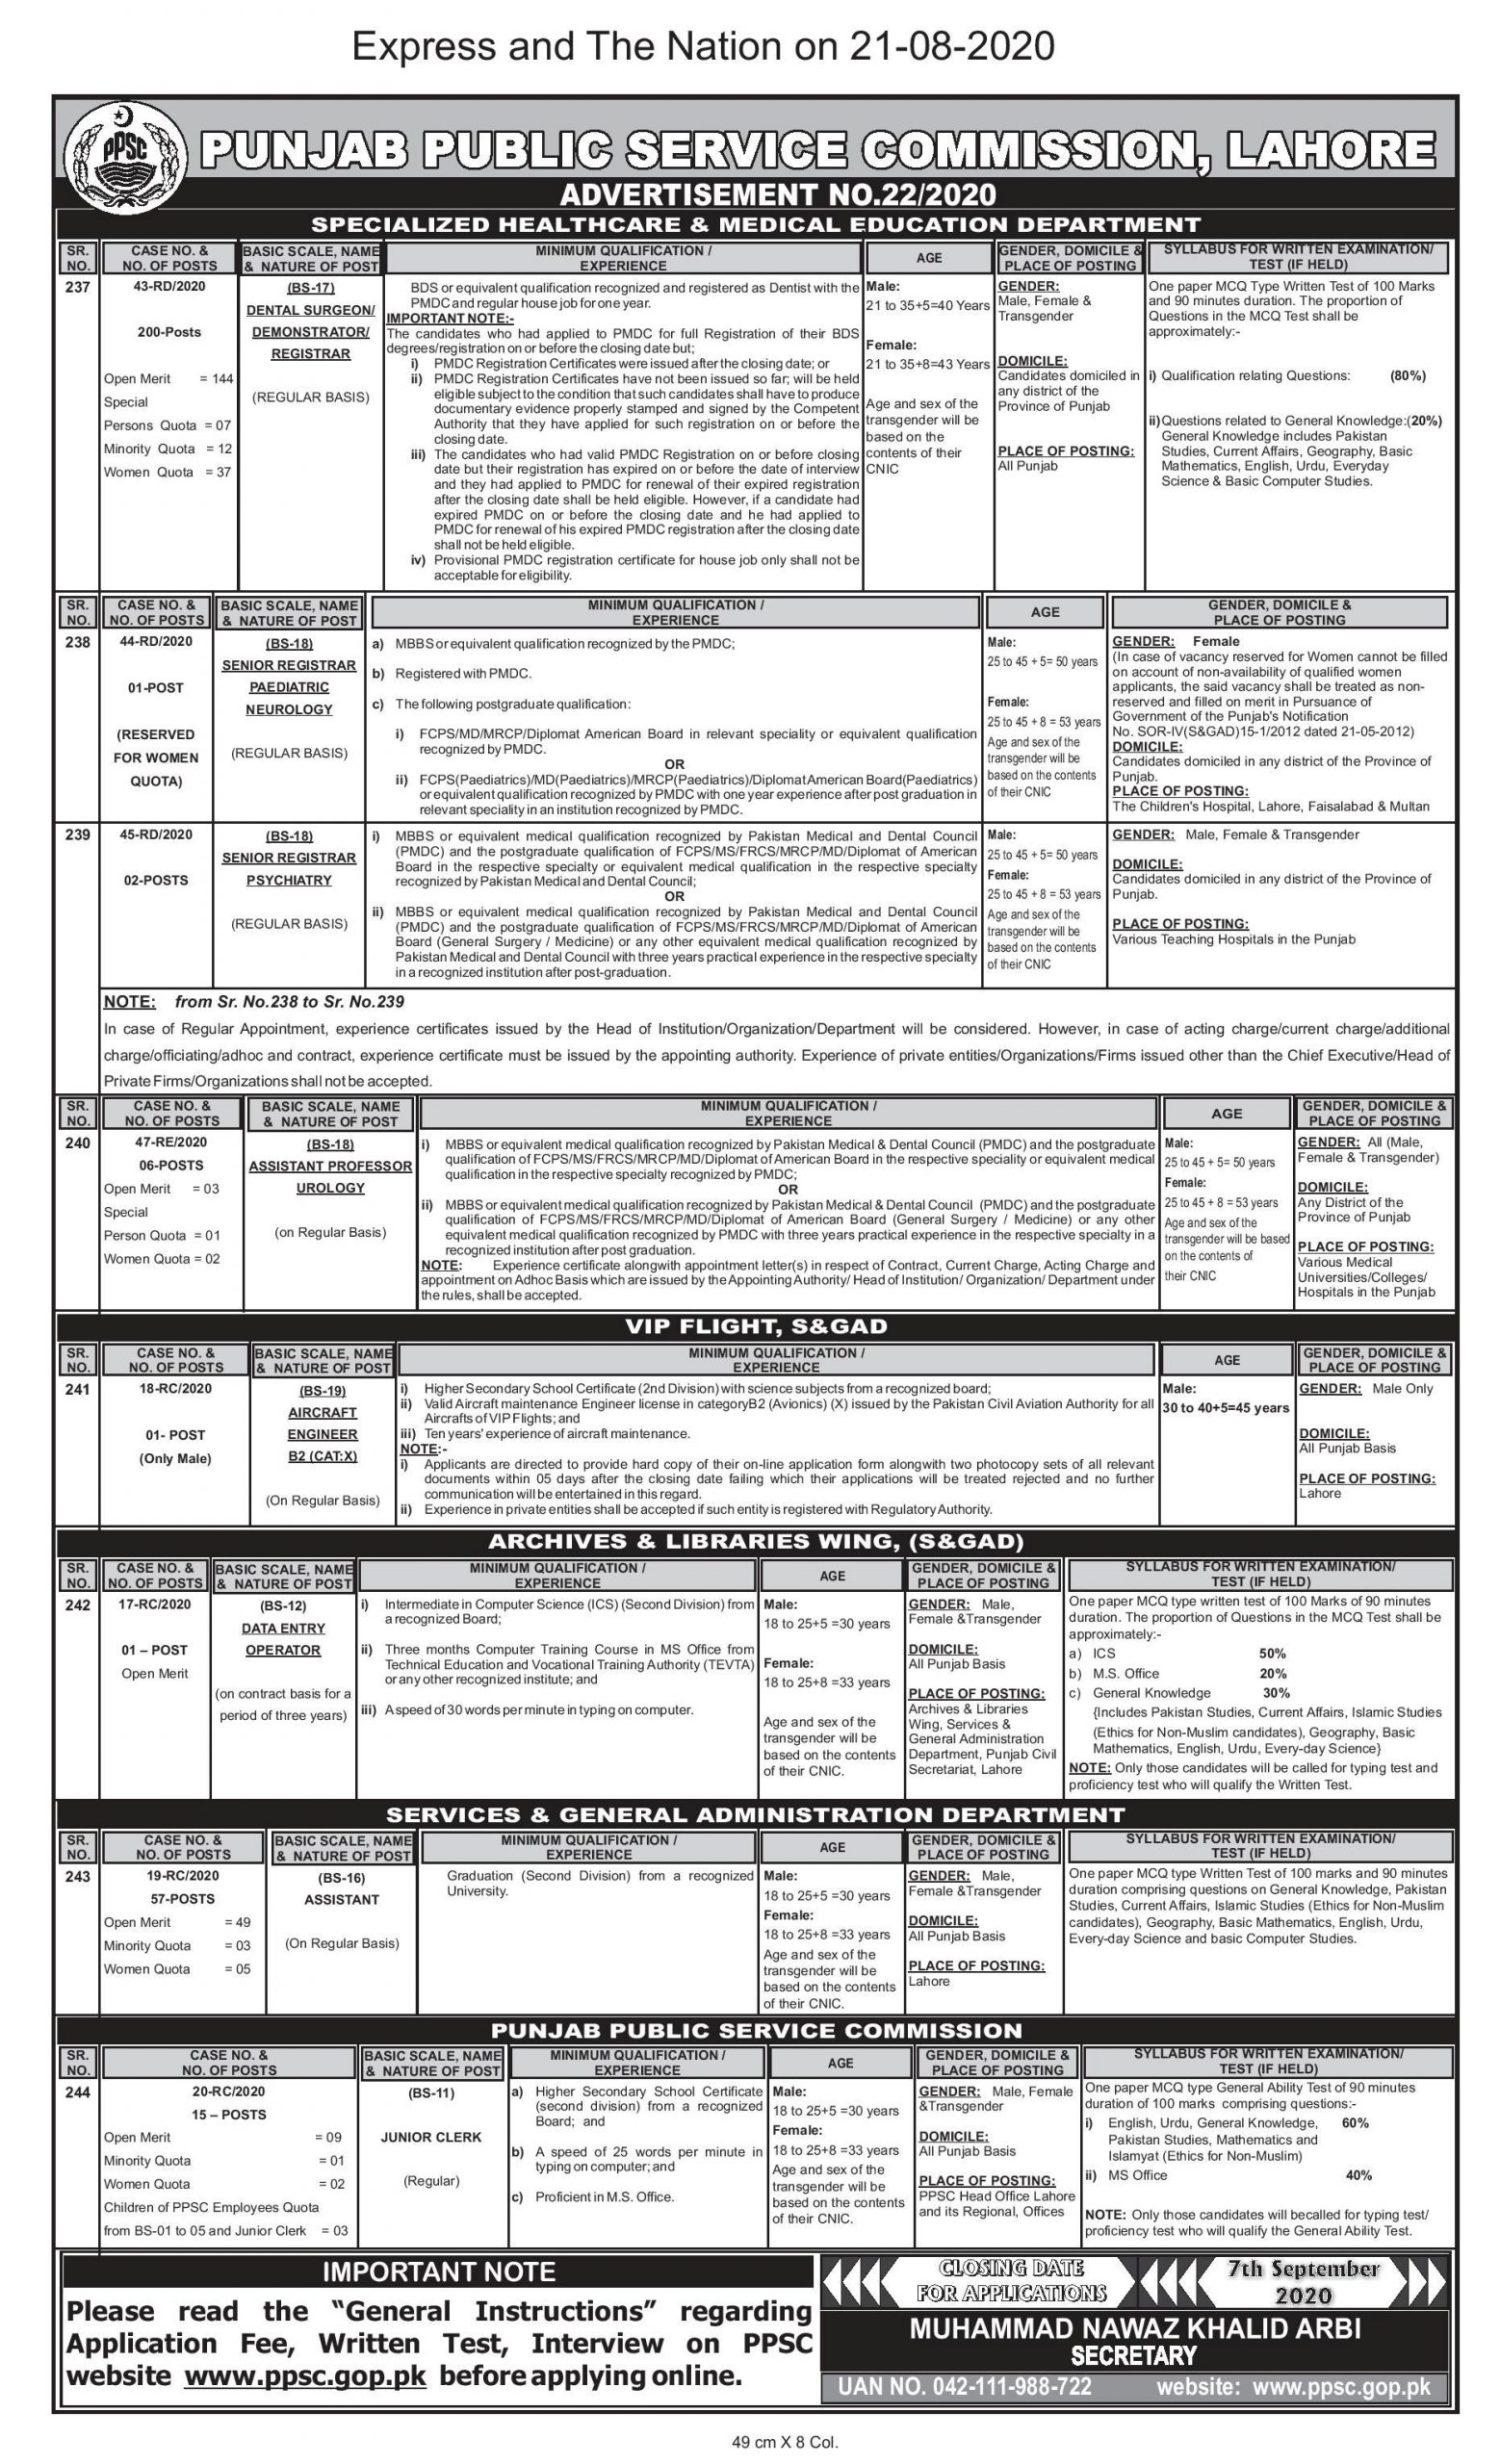 PPSC SPECIALIZED HEALTHCARE & MEDICAL EDUCATION DEPARTMENT JOBS